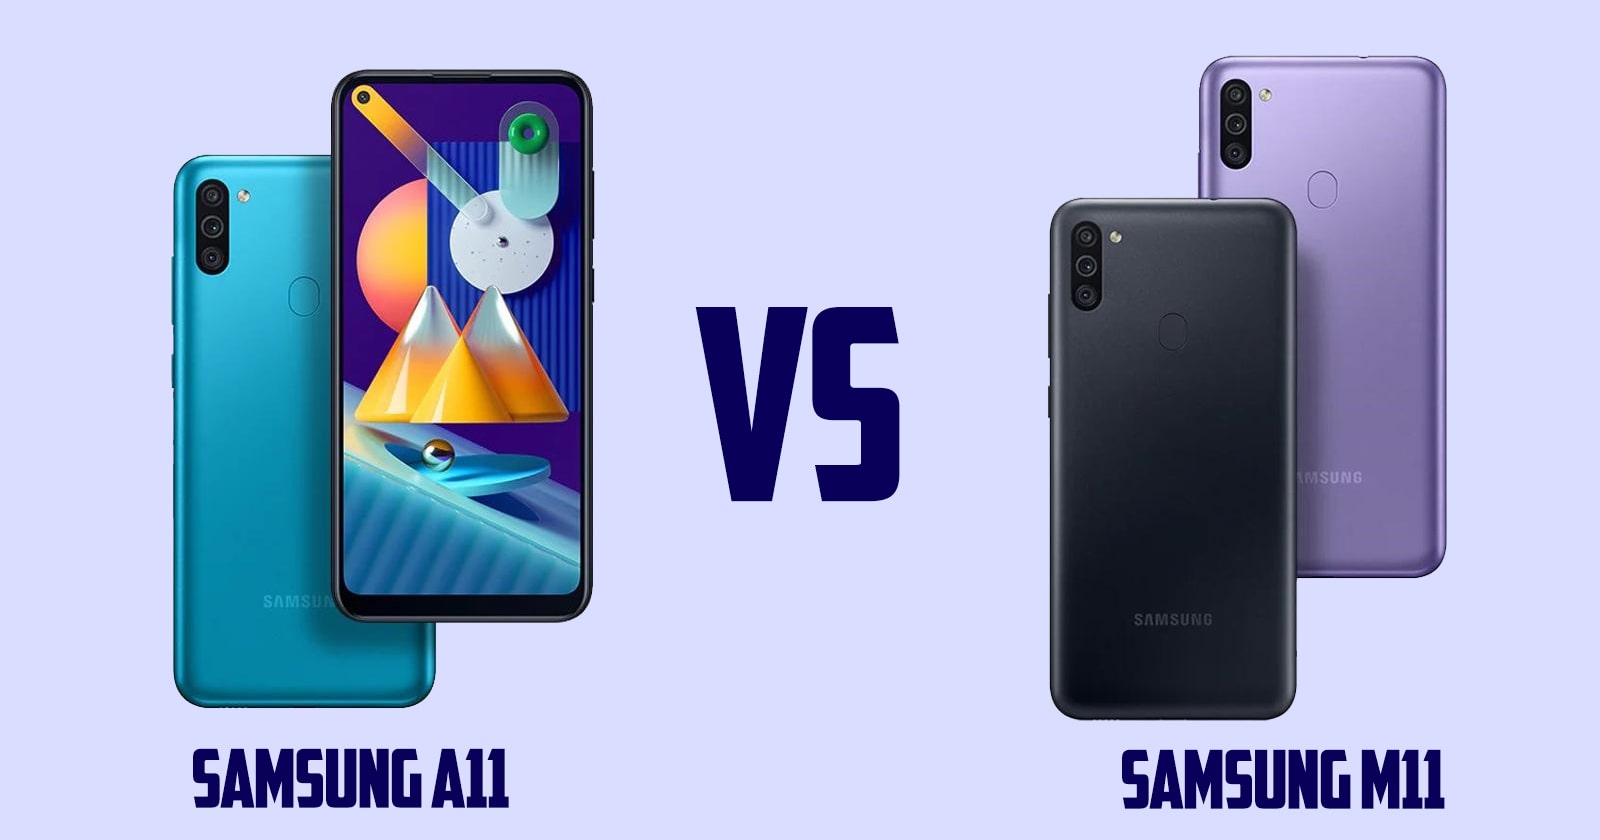 What is the difference between Samsung a11 and m11?